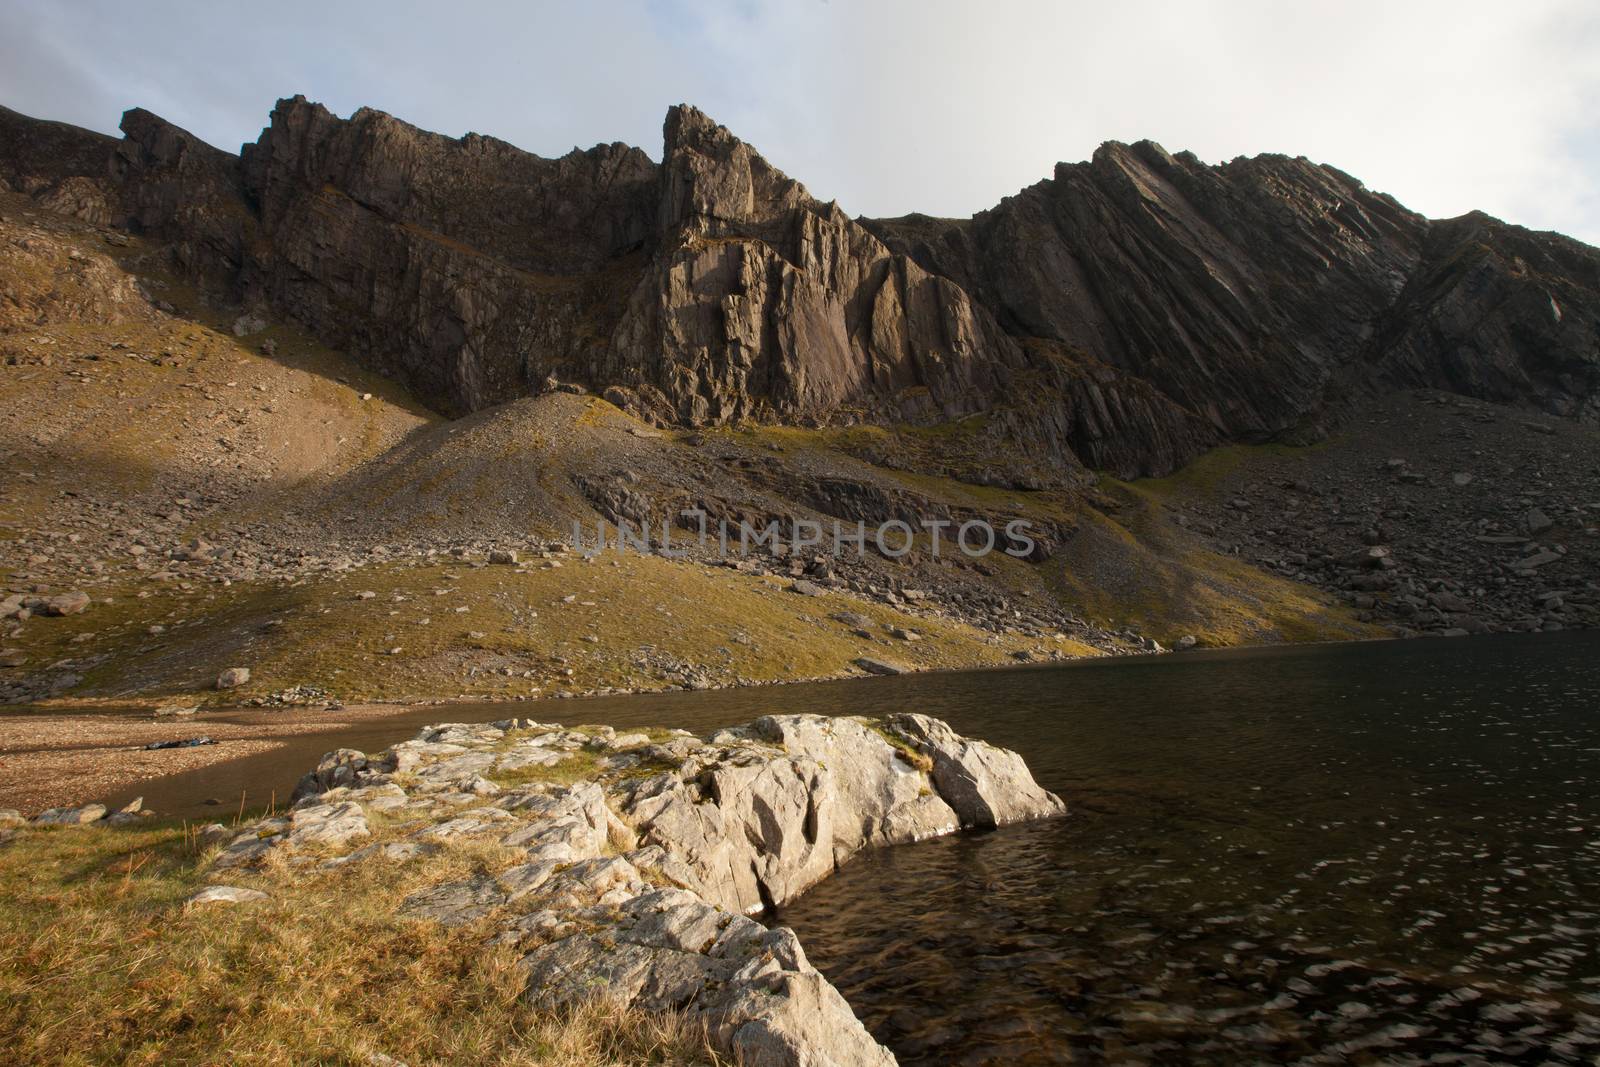 A rocky foreground leads to a lake and the impressive mountain crags of Clogwyn Du'r Arddu, Snowdonia national park, Wales, UK.